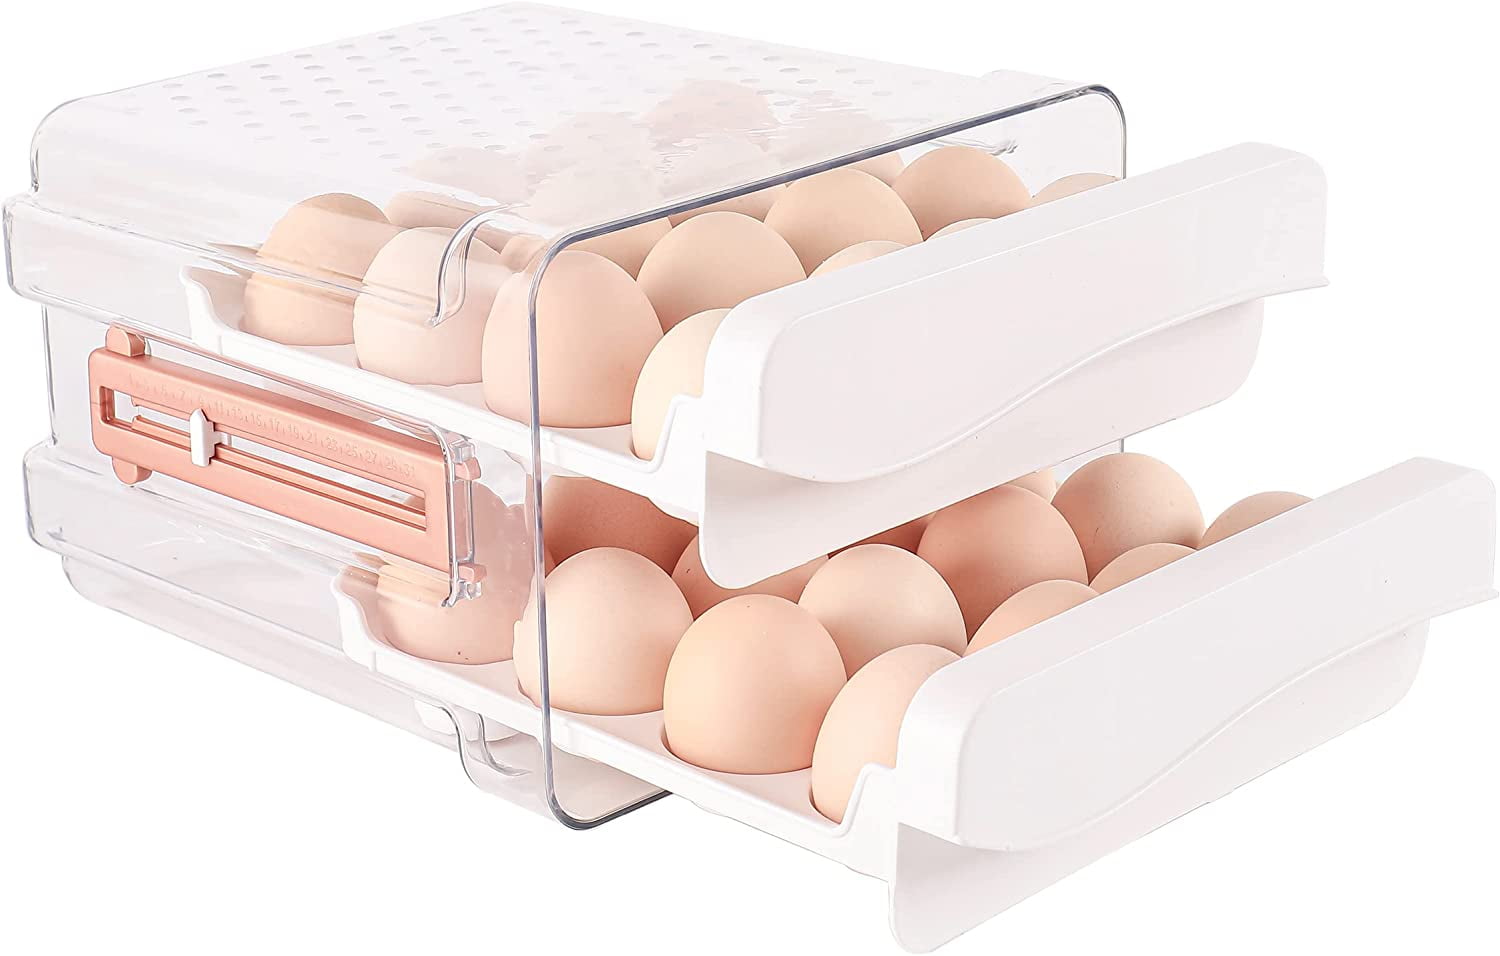 32 Egg Holder for Refrigerator, Large Capacity Egg Container for